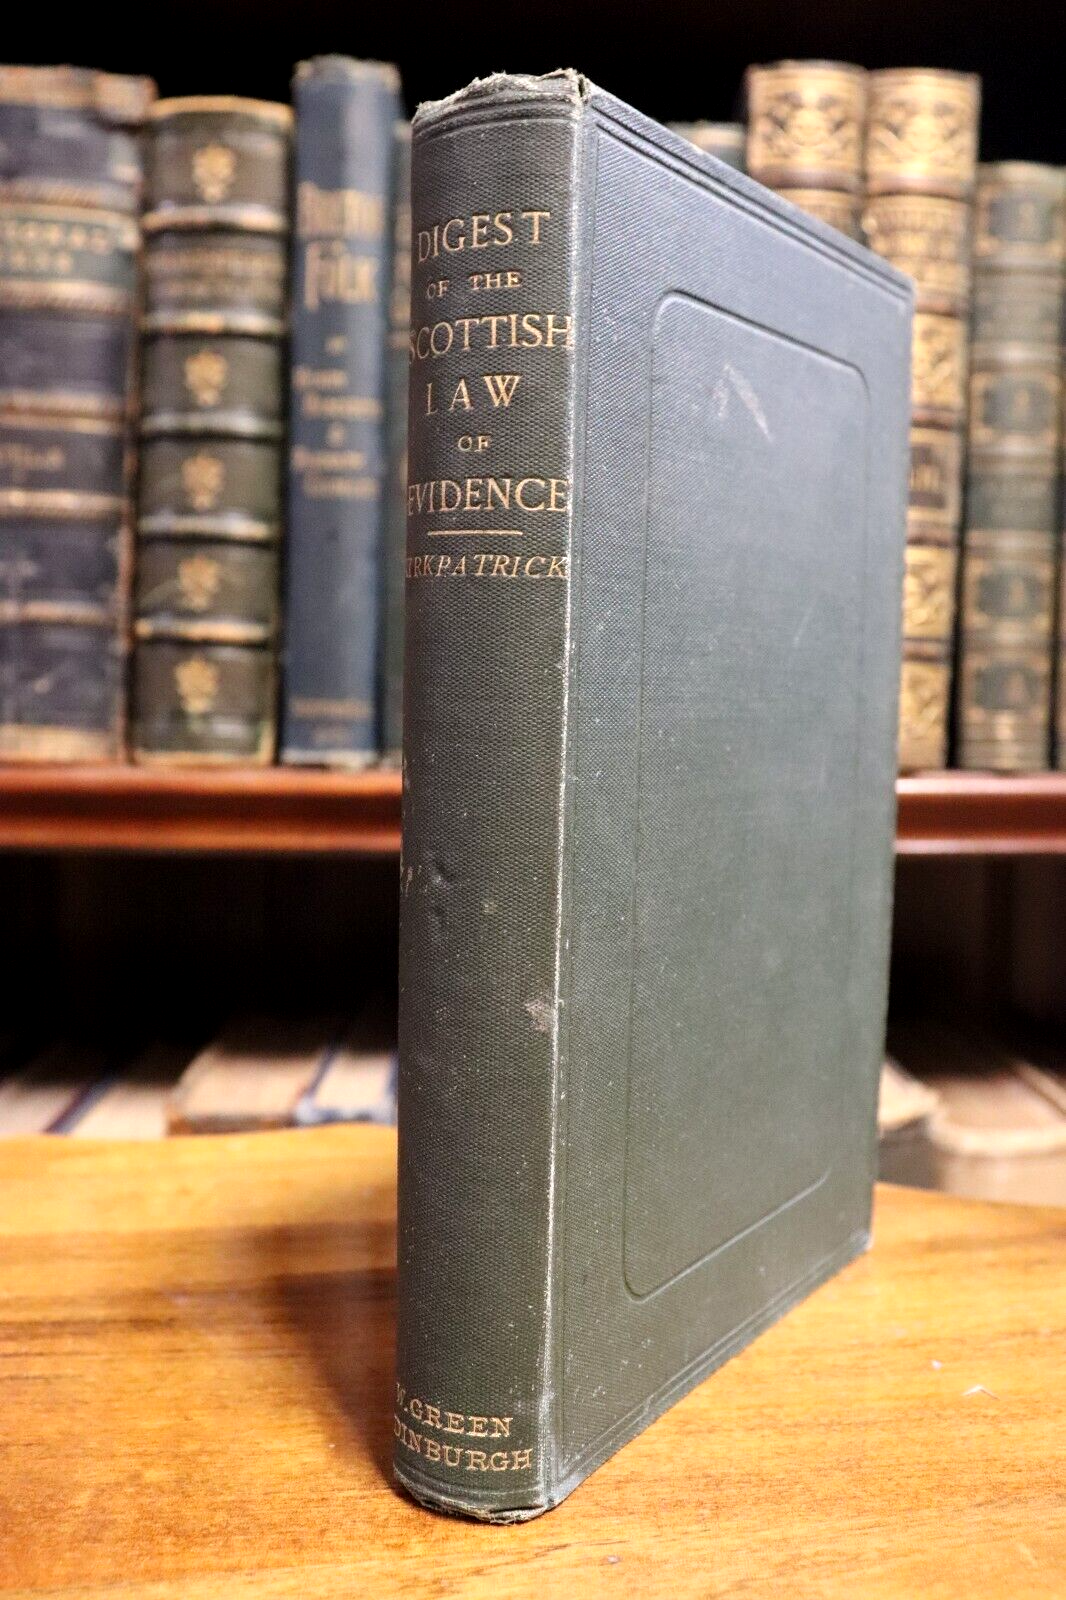 Digest Of The Scottish Law Of Evidence - 1882 - Antique 1st Edition History Book